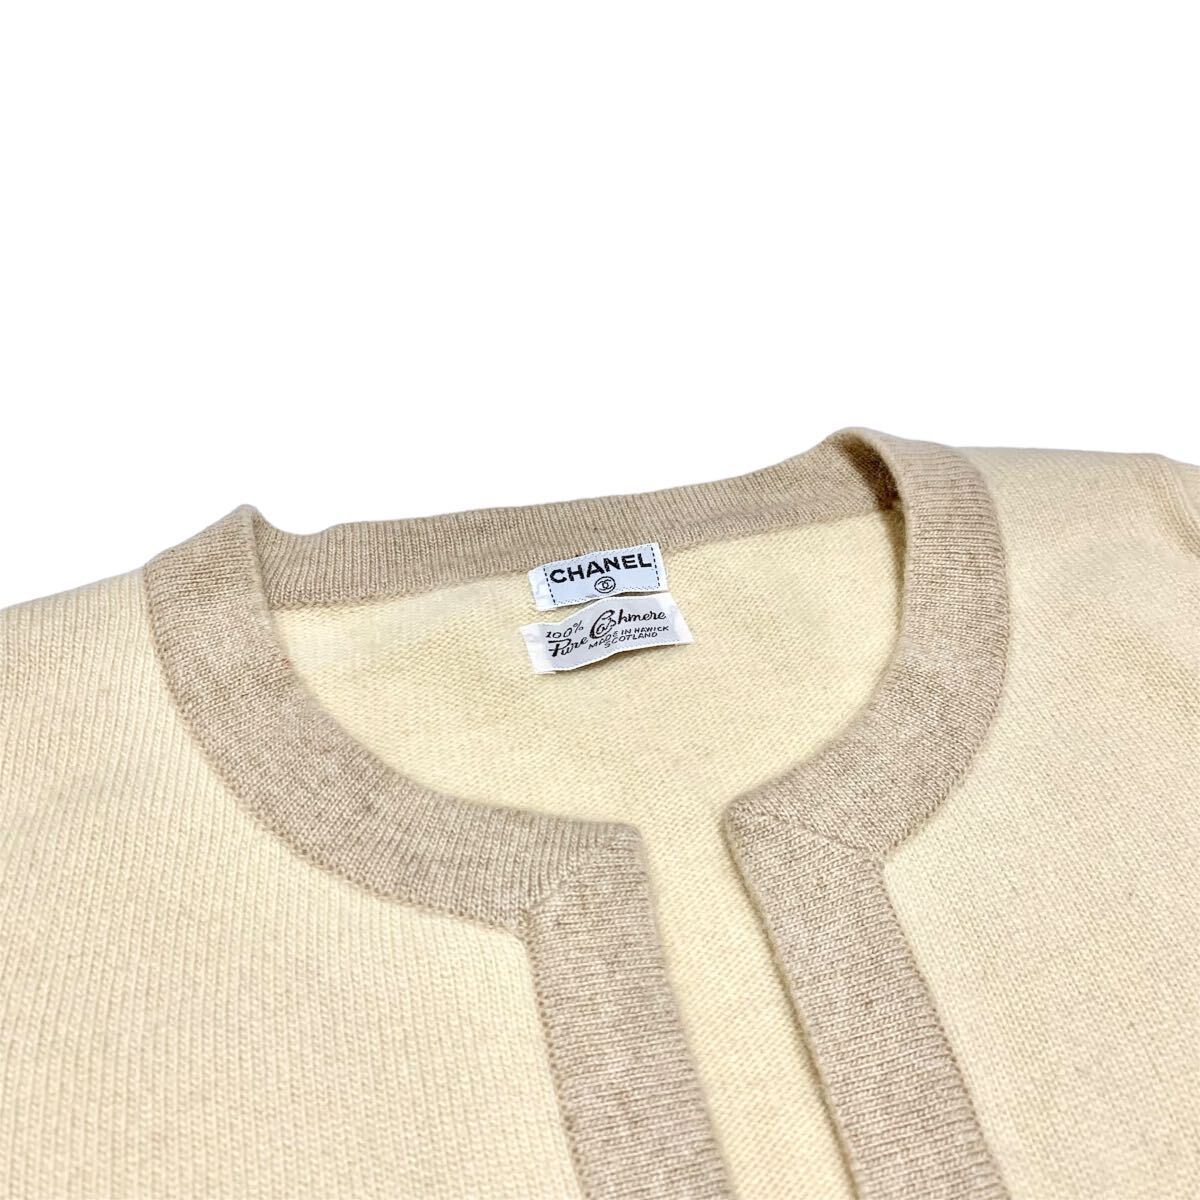  superior article regular goods CHANEL Chanel Vintage here Mark CC Logo gold button embroidery cardigan knitted sweater cashmere pocket bai color 